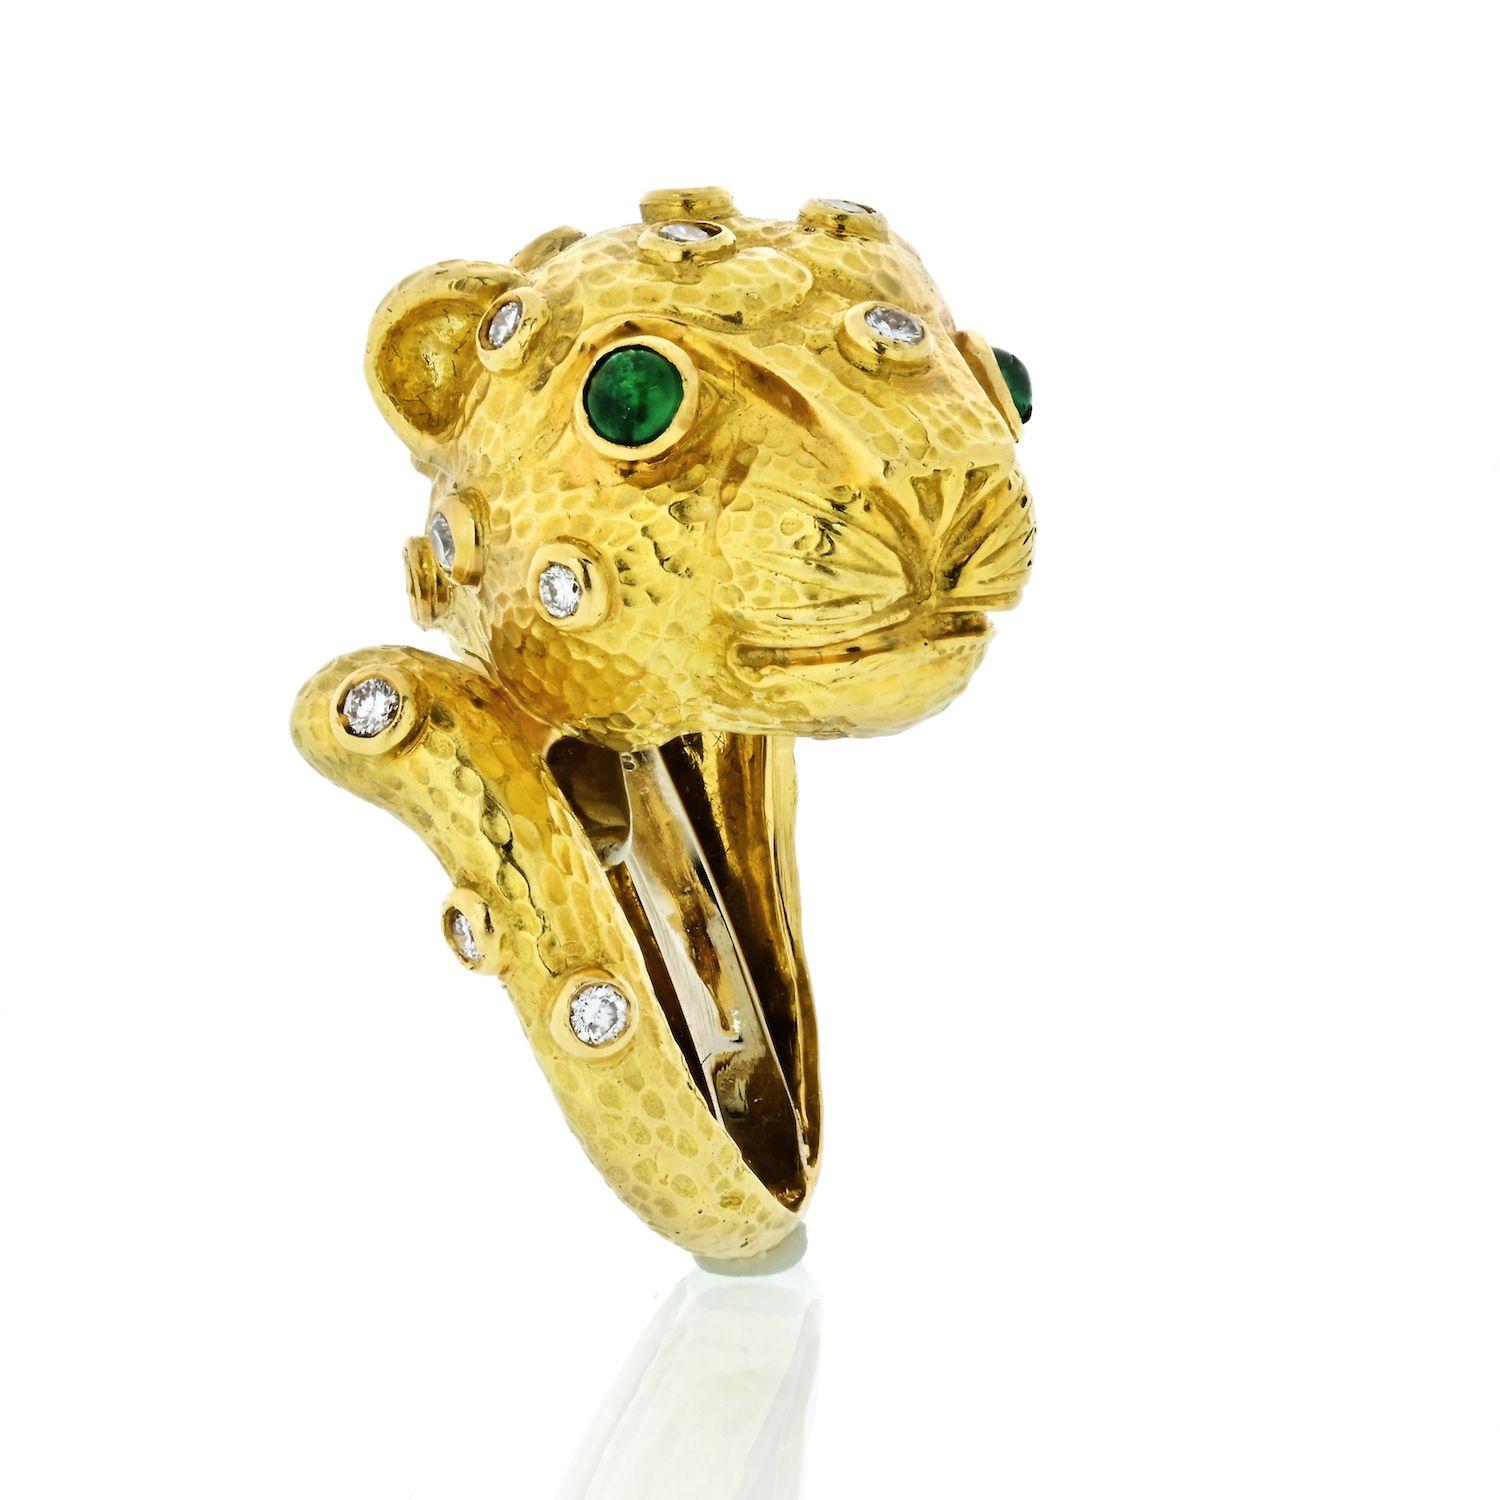 The chic David Webb lion ring is not to be taken lightly featuring full-cut round diamonds of an estimated 1.10 carats set in 18k white gold, accented with cabochon green emeralds and signature hammered finish applied on 18k yellow gold. Completed